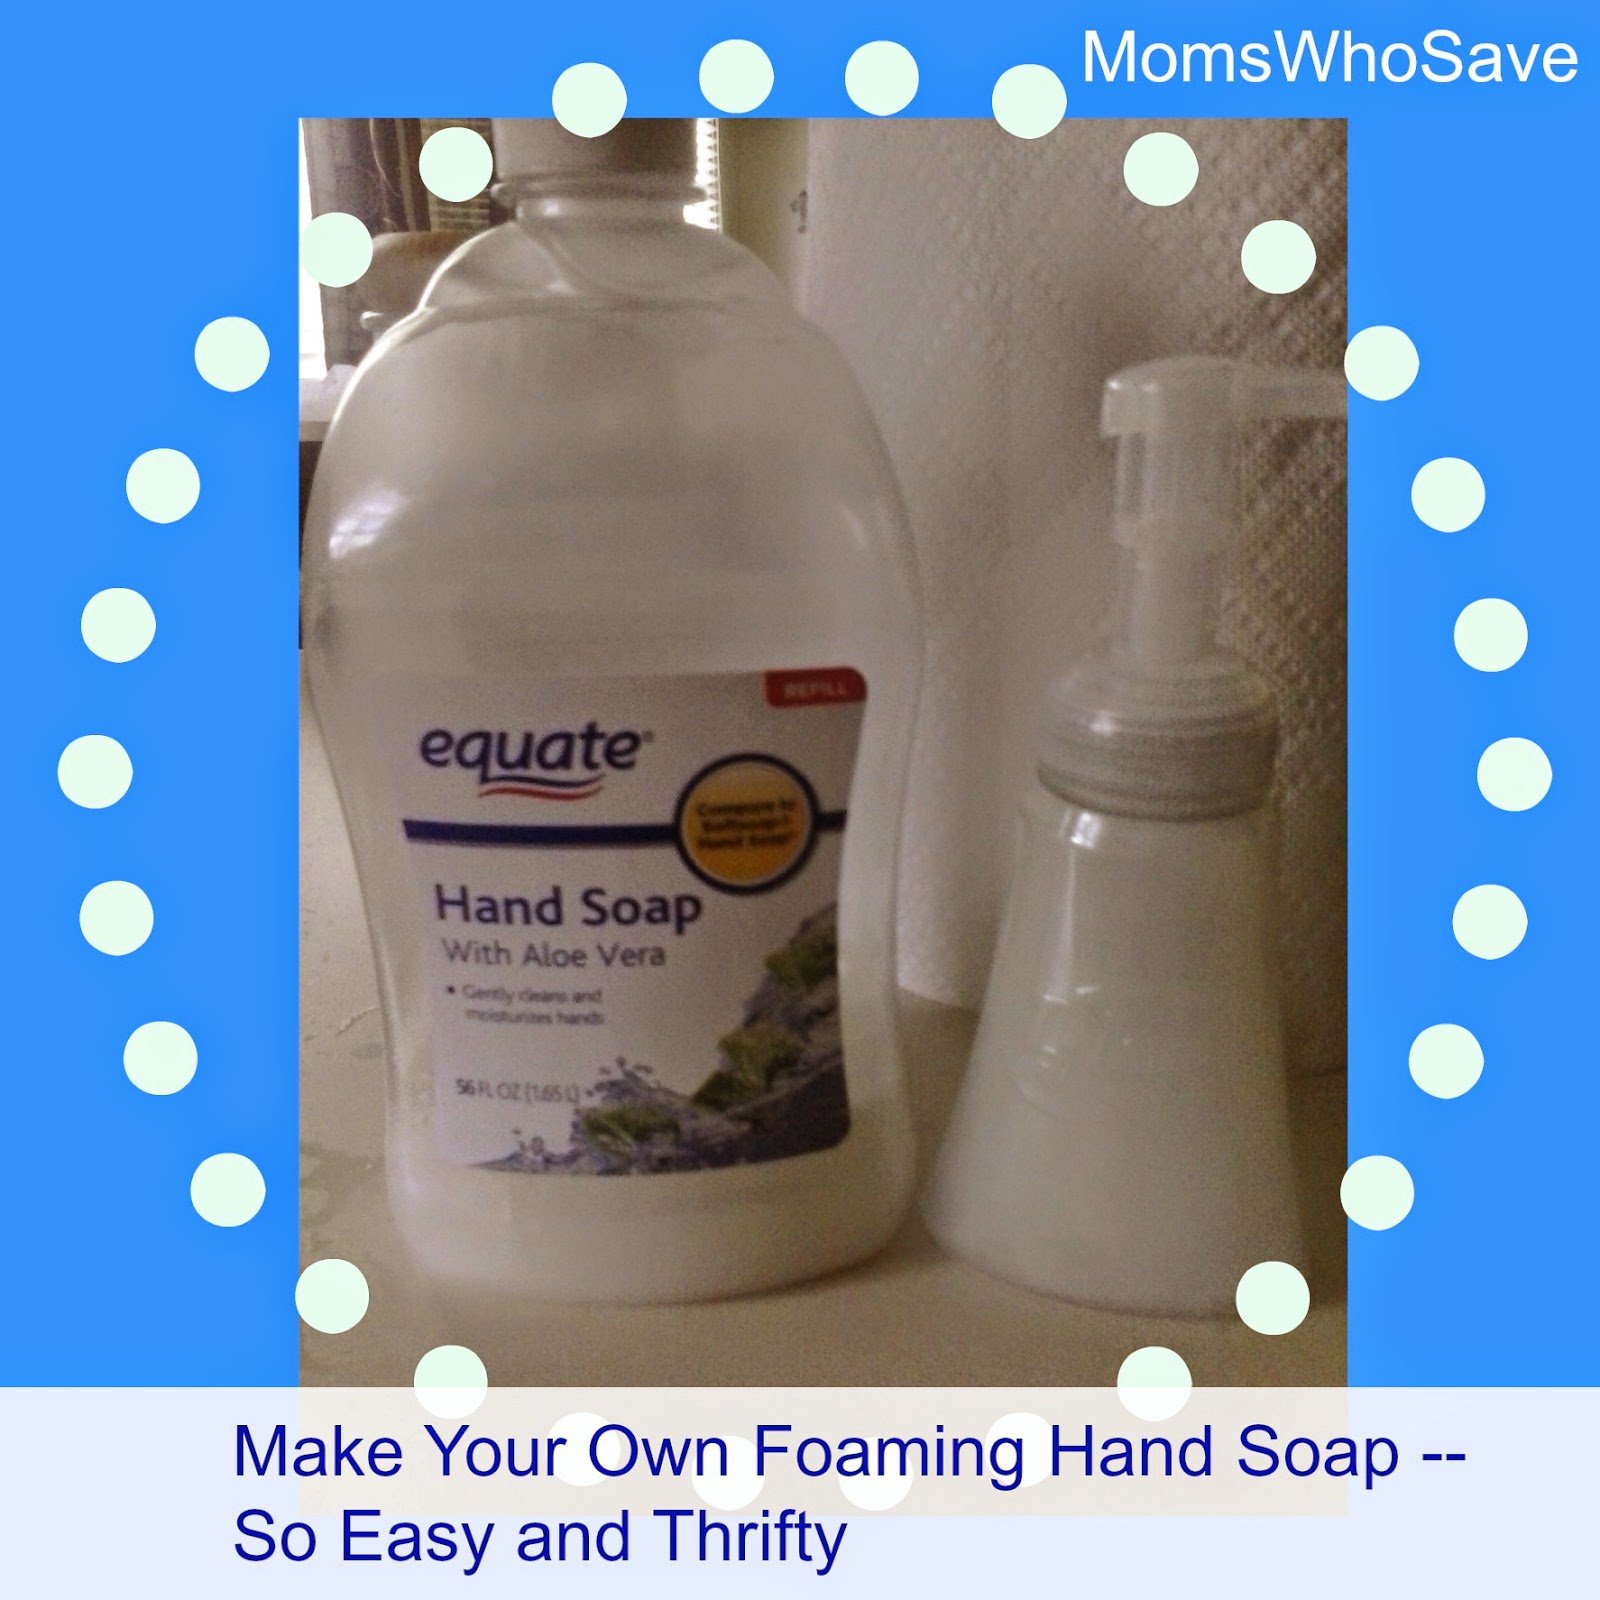 Make Your Own Foaming Hand Soap -- So Easy and Thrifty!